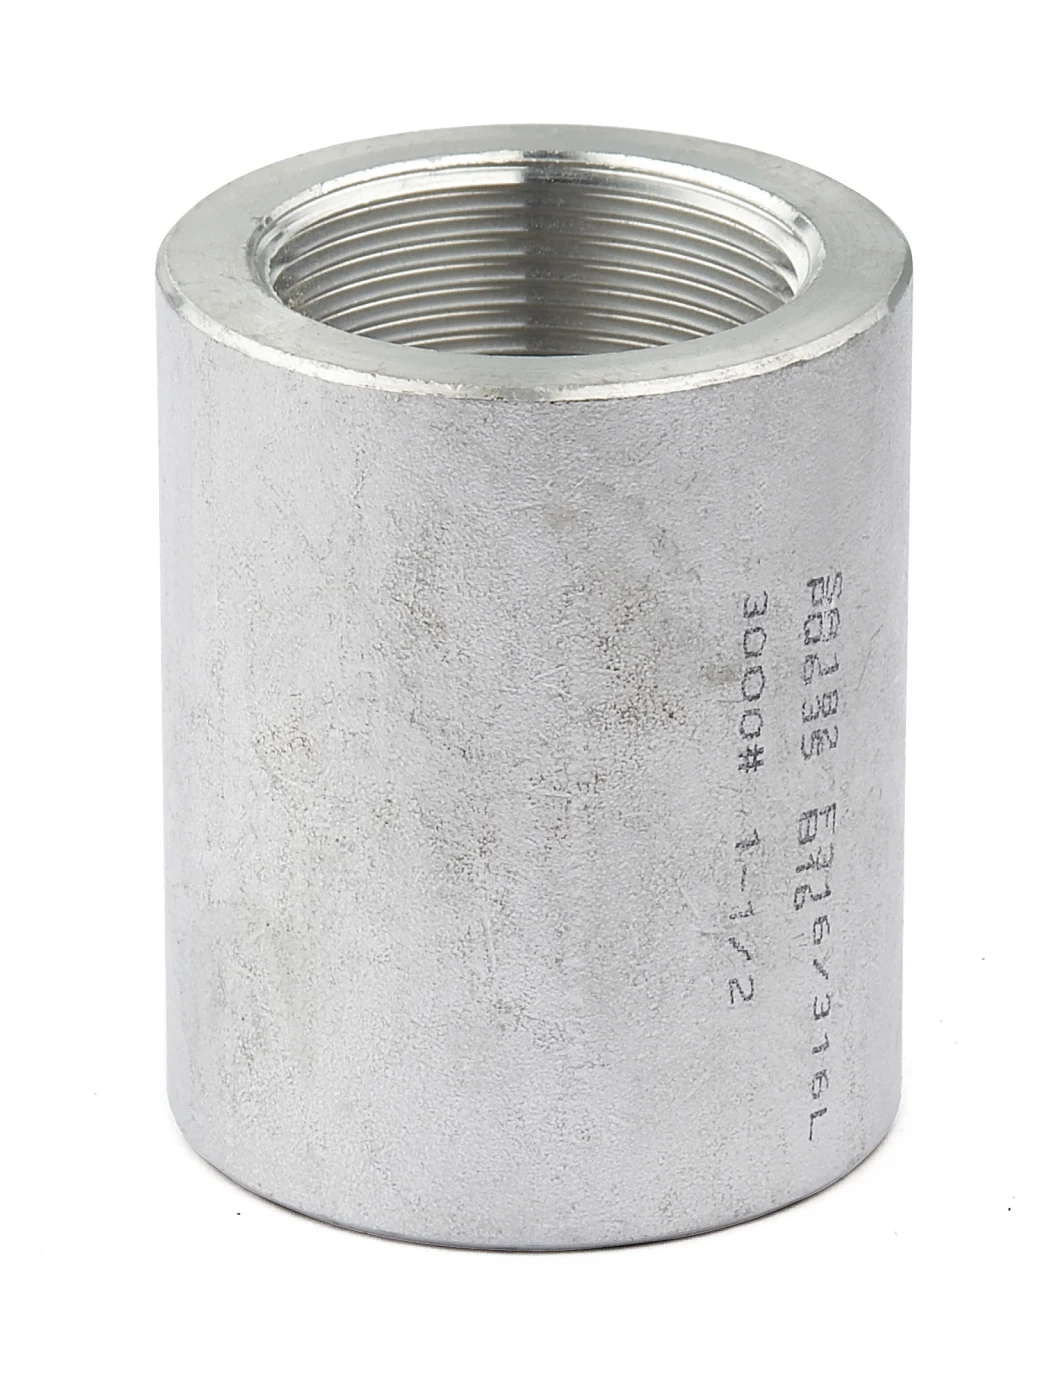 Bsp Stainless Steel Camlock Coupling Made From China